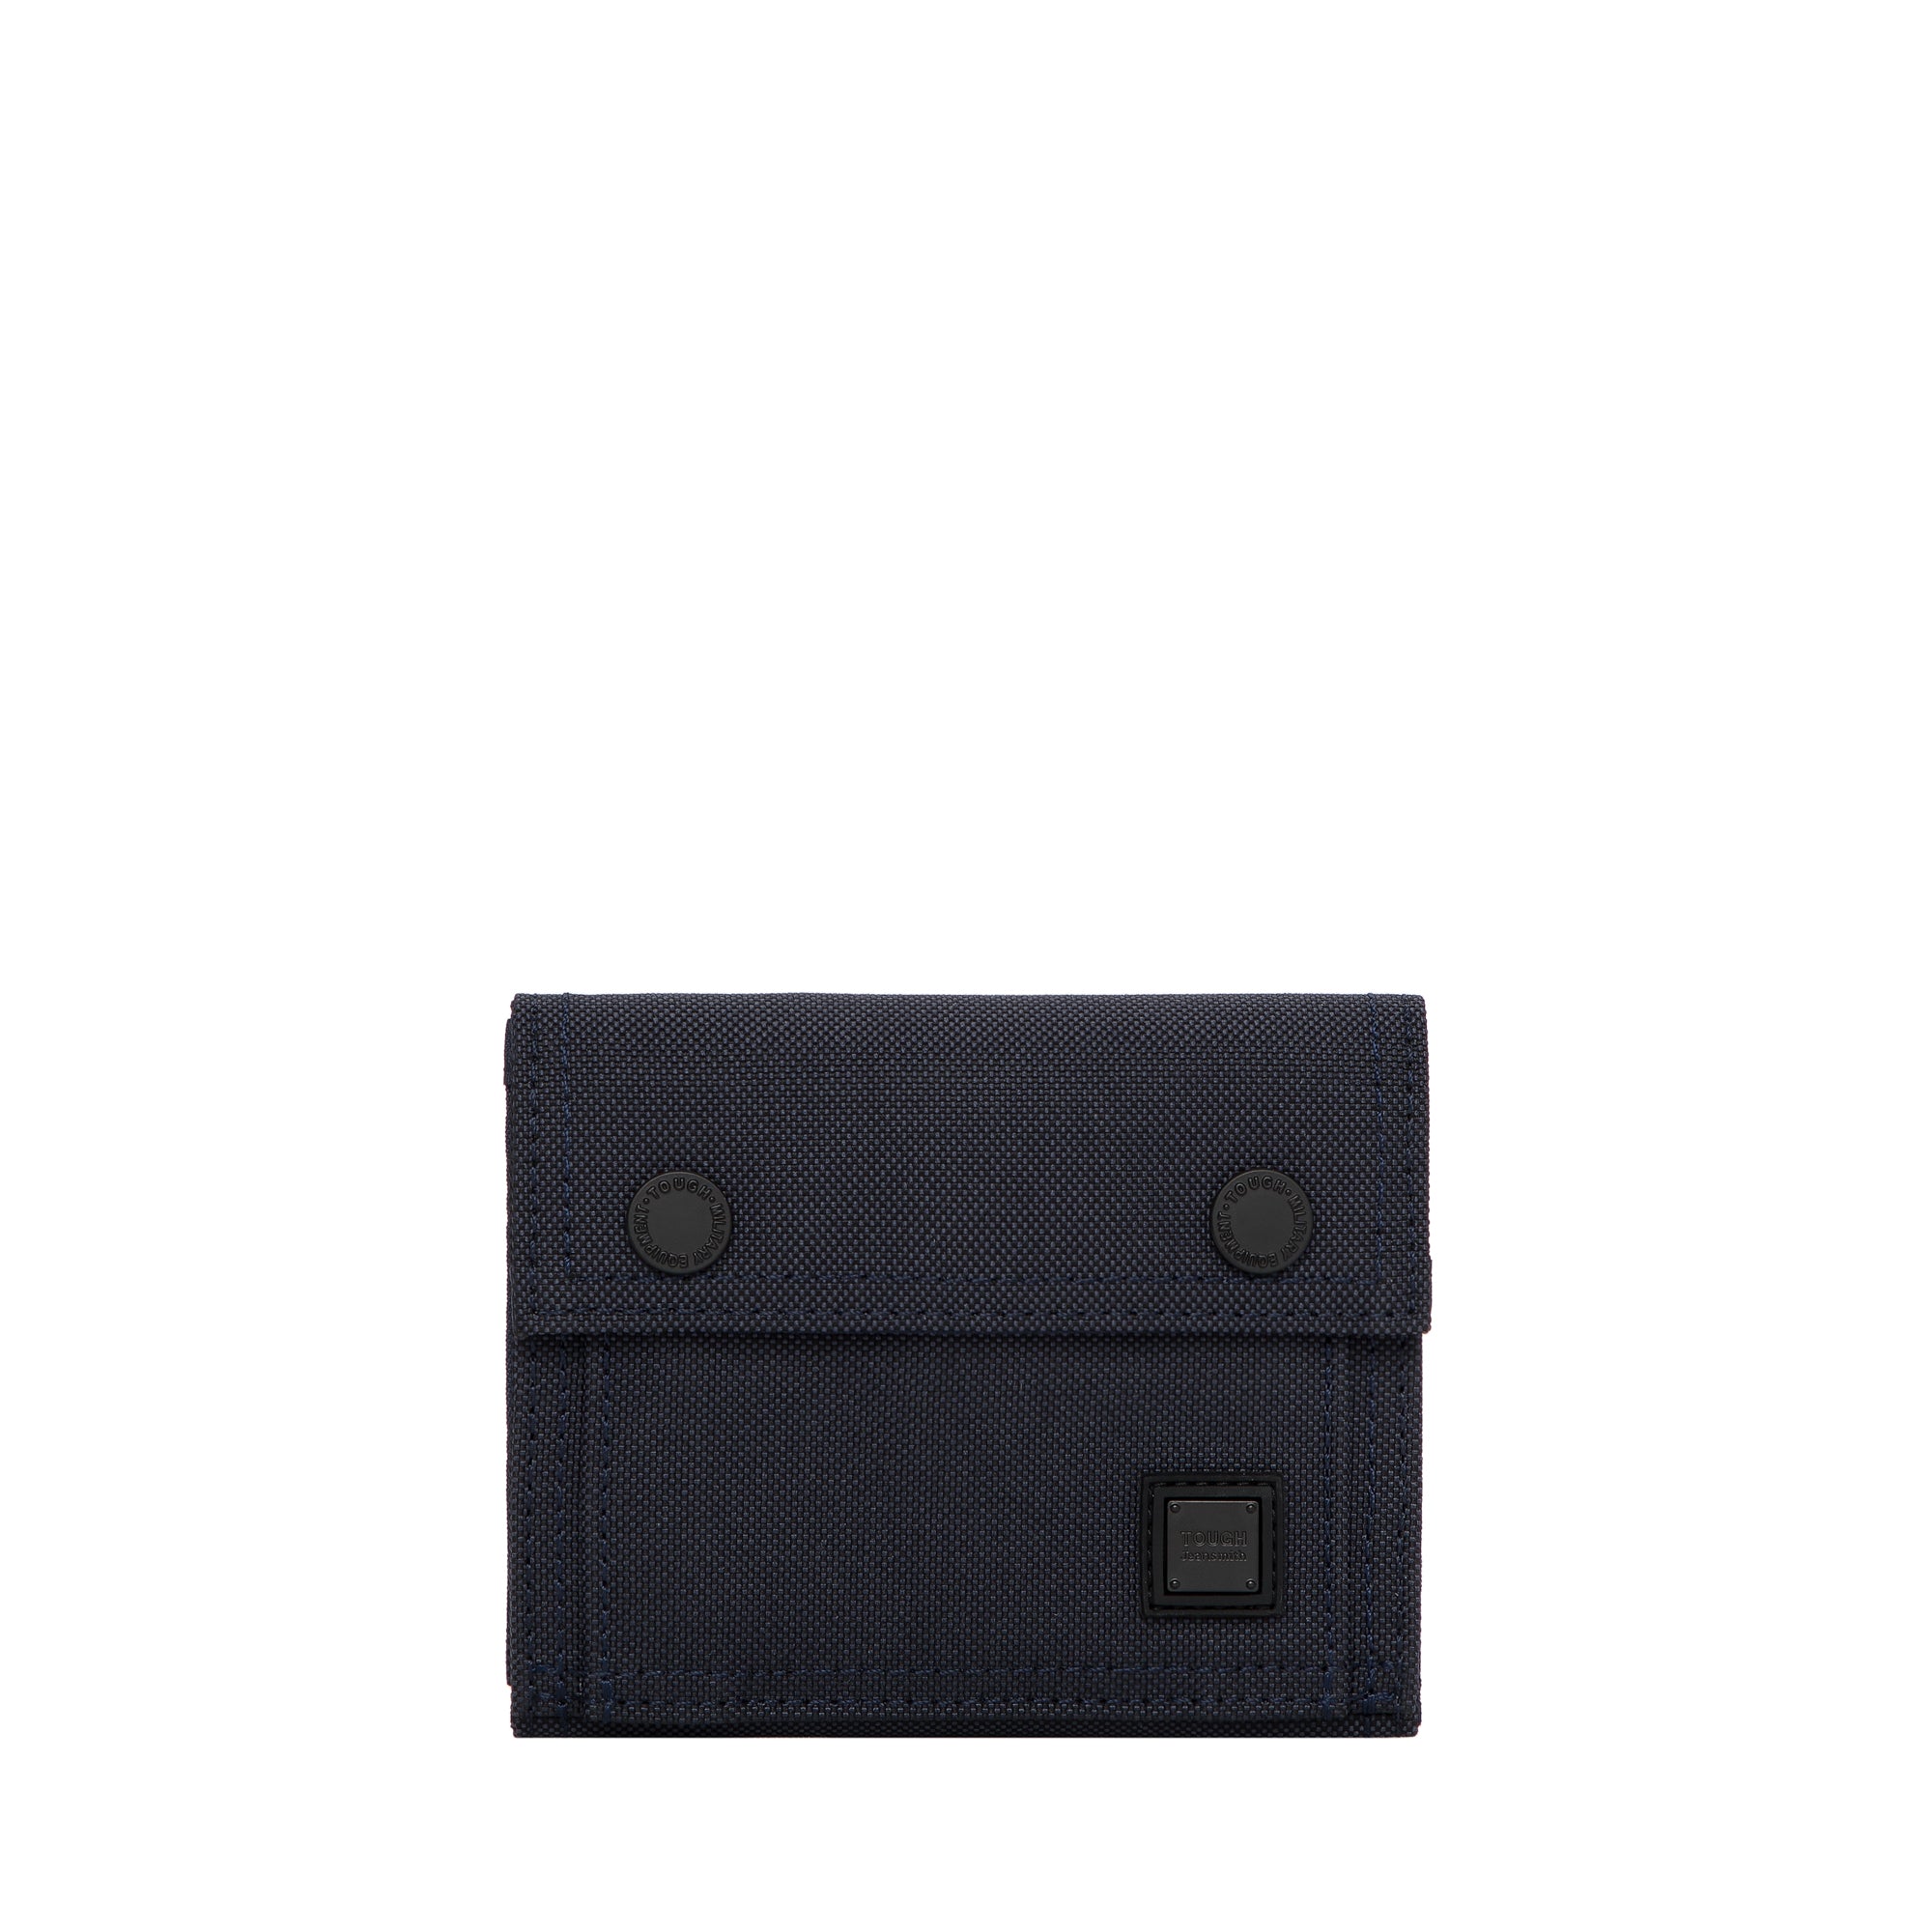 TOUGH JEANSMITH Moment short polyester wallet #TW123-003A